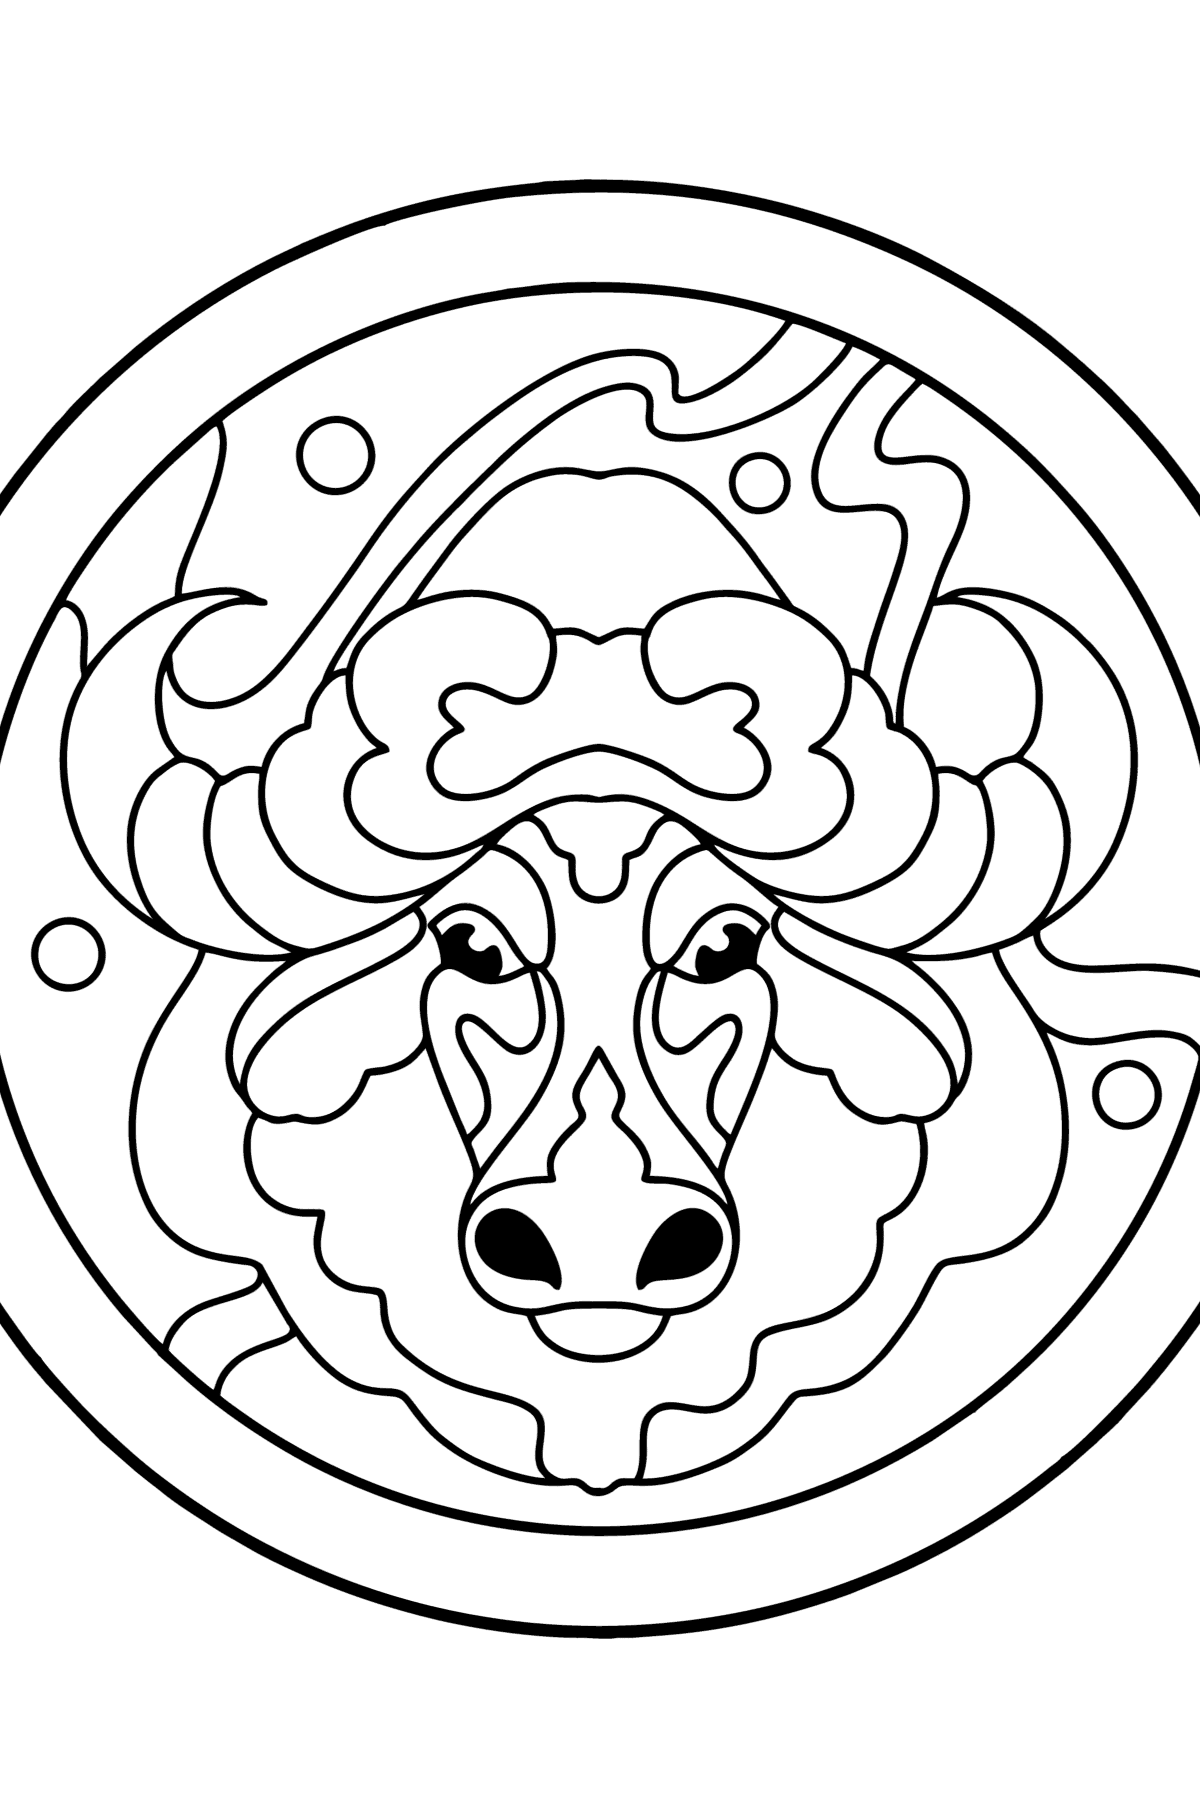 Coloring page for kids - zodiac sign Taurus - Coloring Pages for Kids